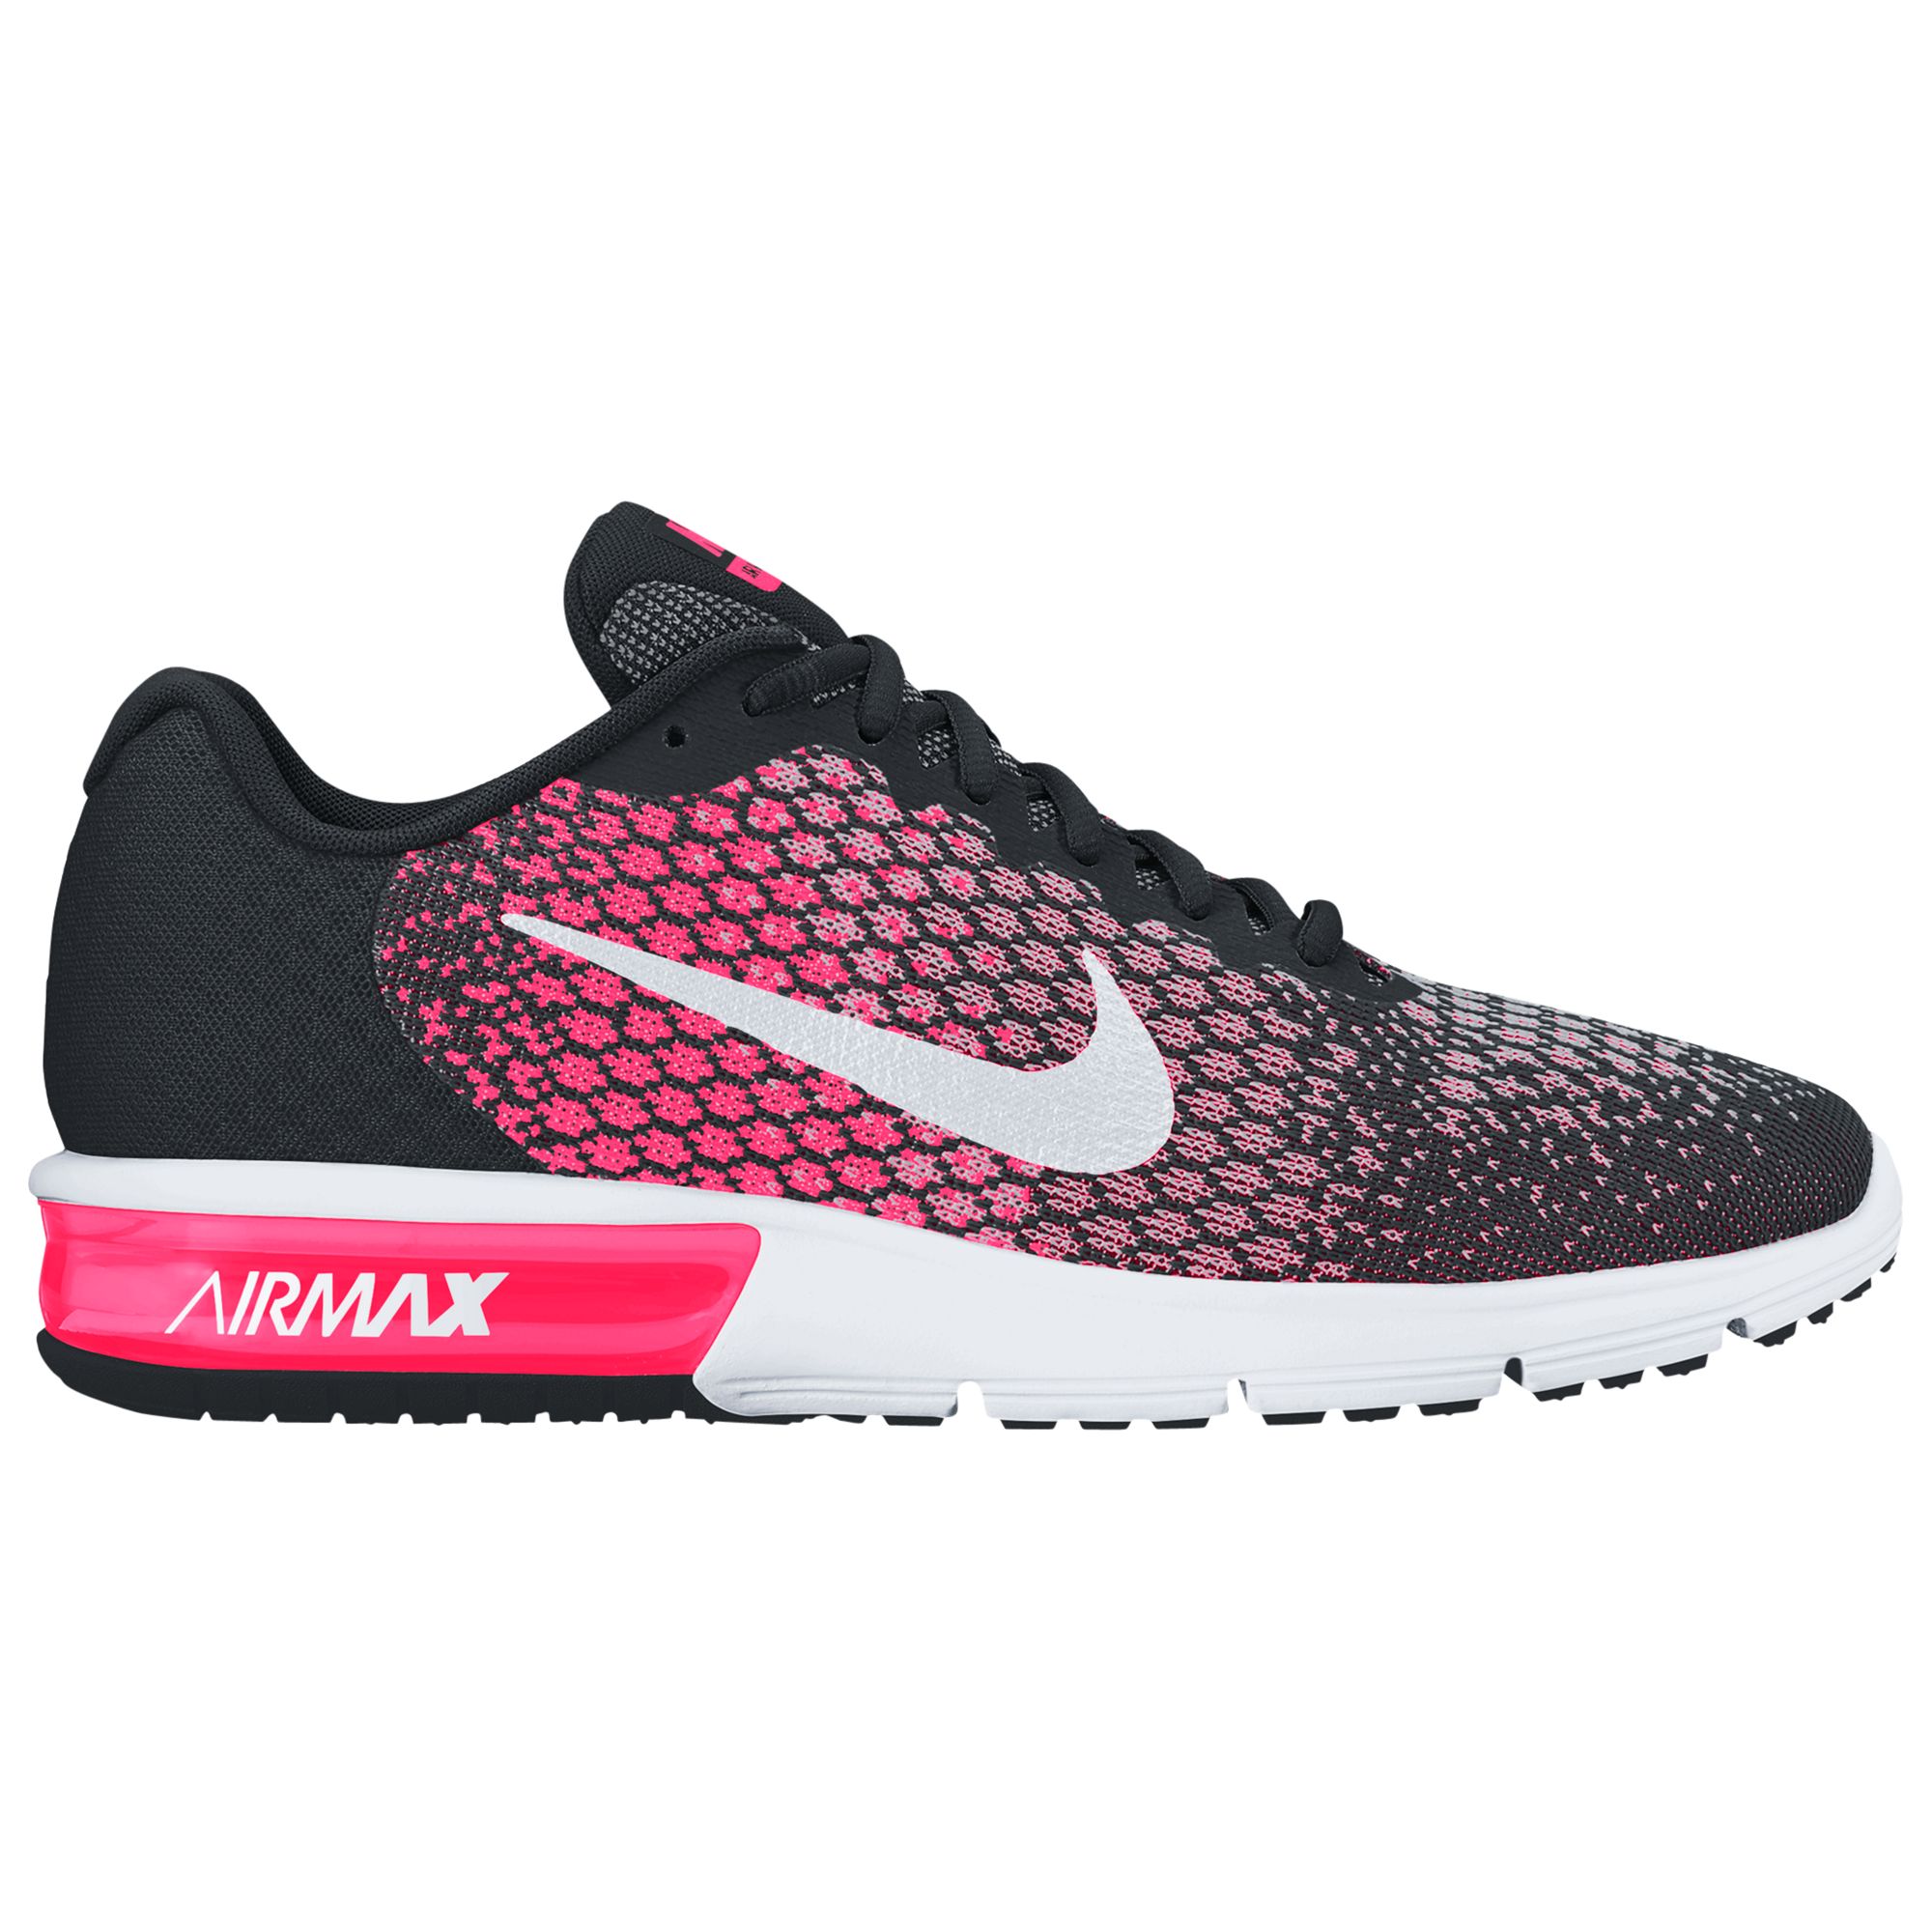 nike air max sequent pink